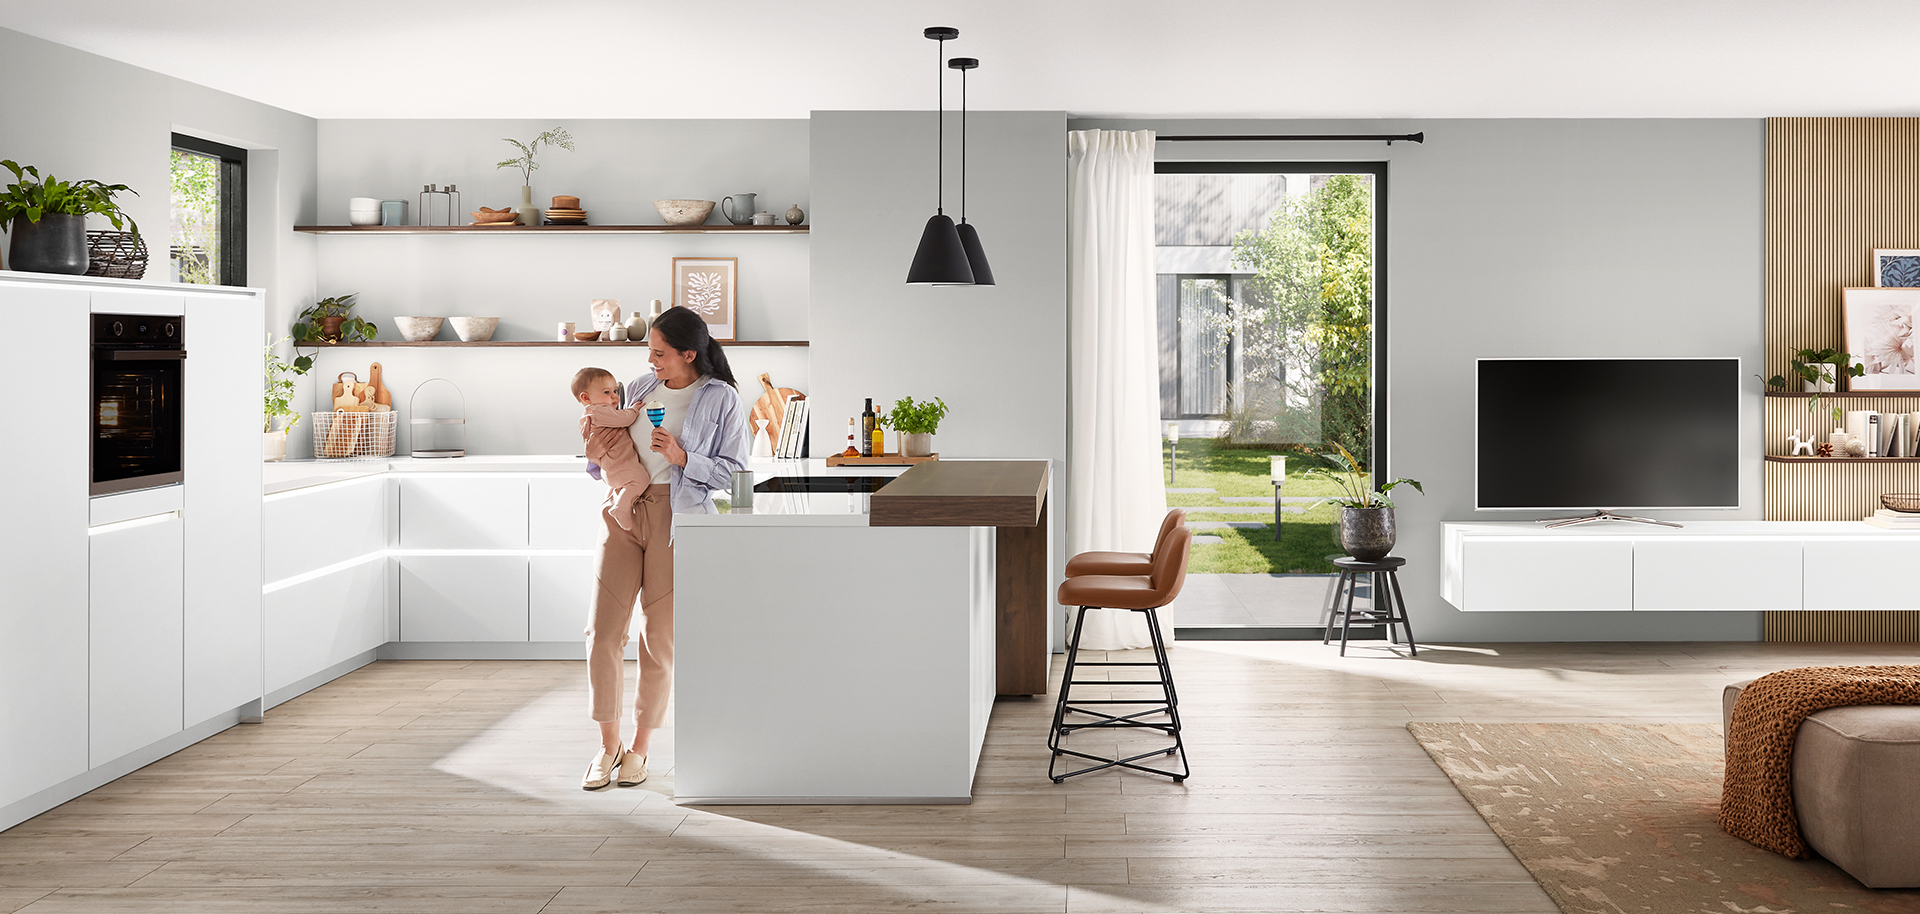 Modern kitchen interior with a clean, minimalistic design featuring white cabinets, a central island, and a young mother lovingly holding her child.